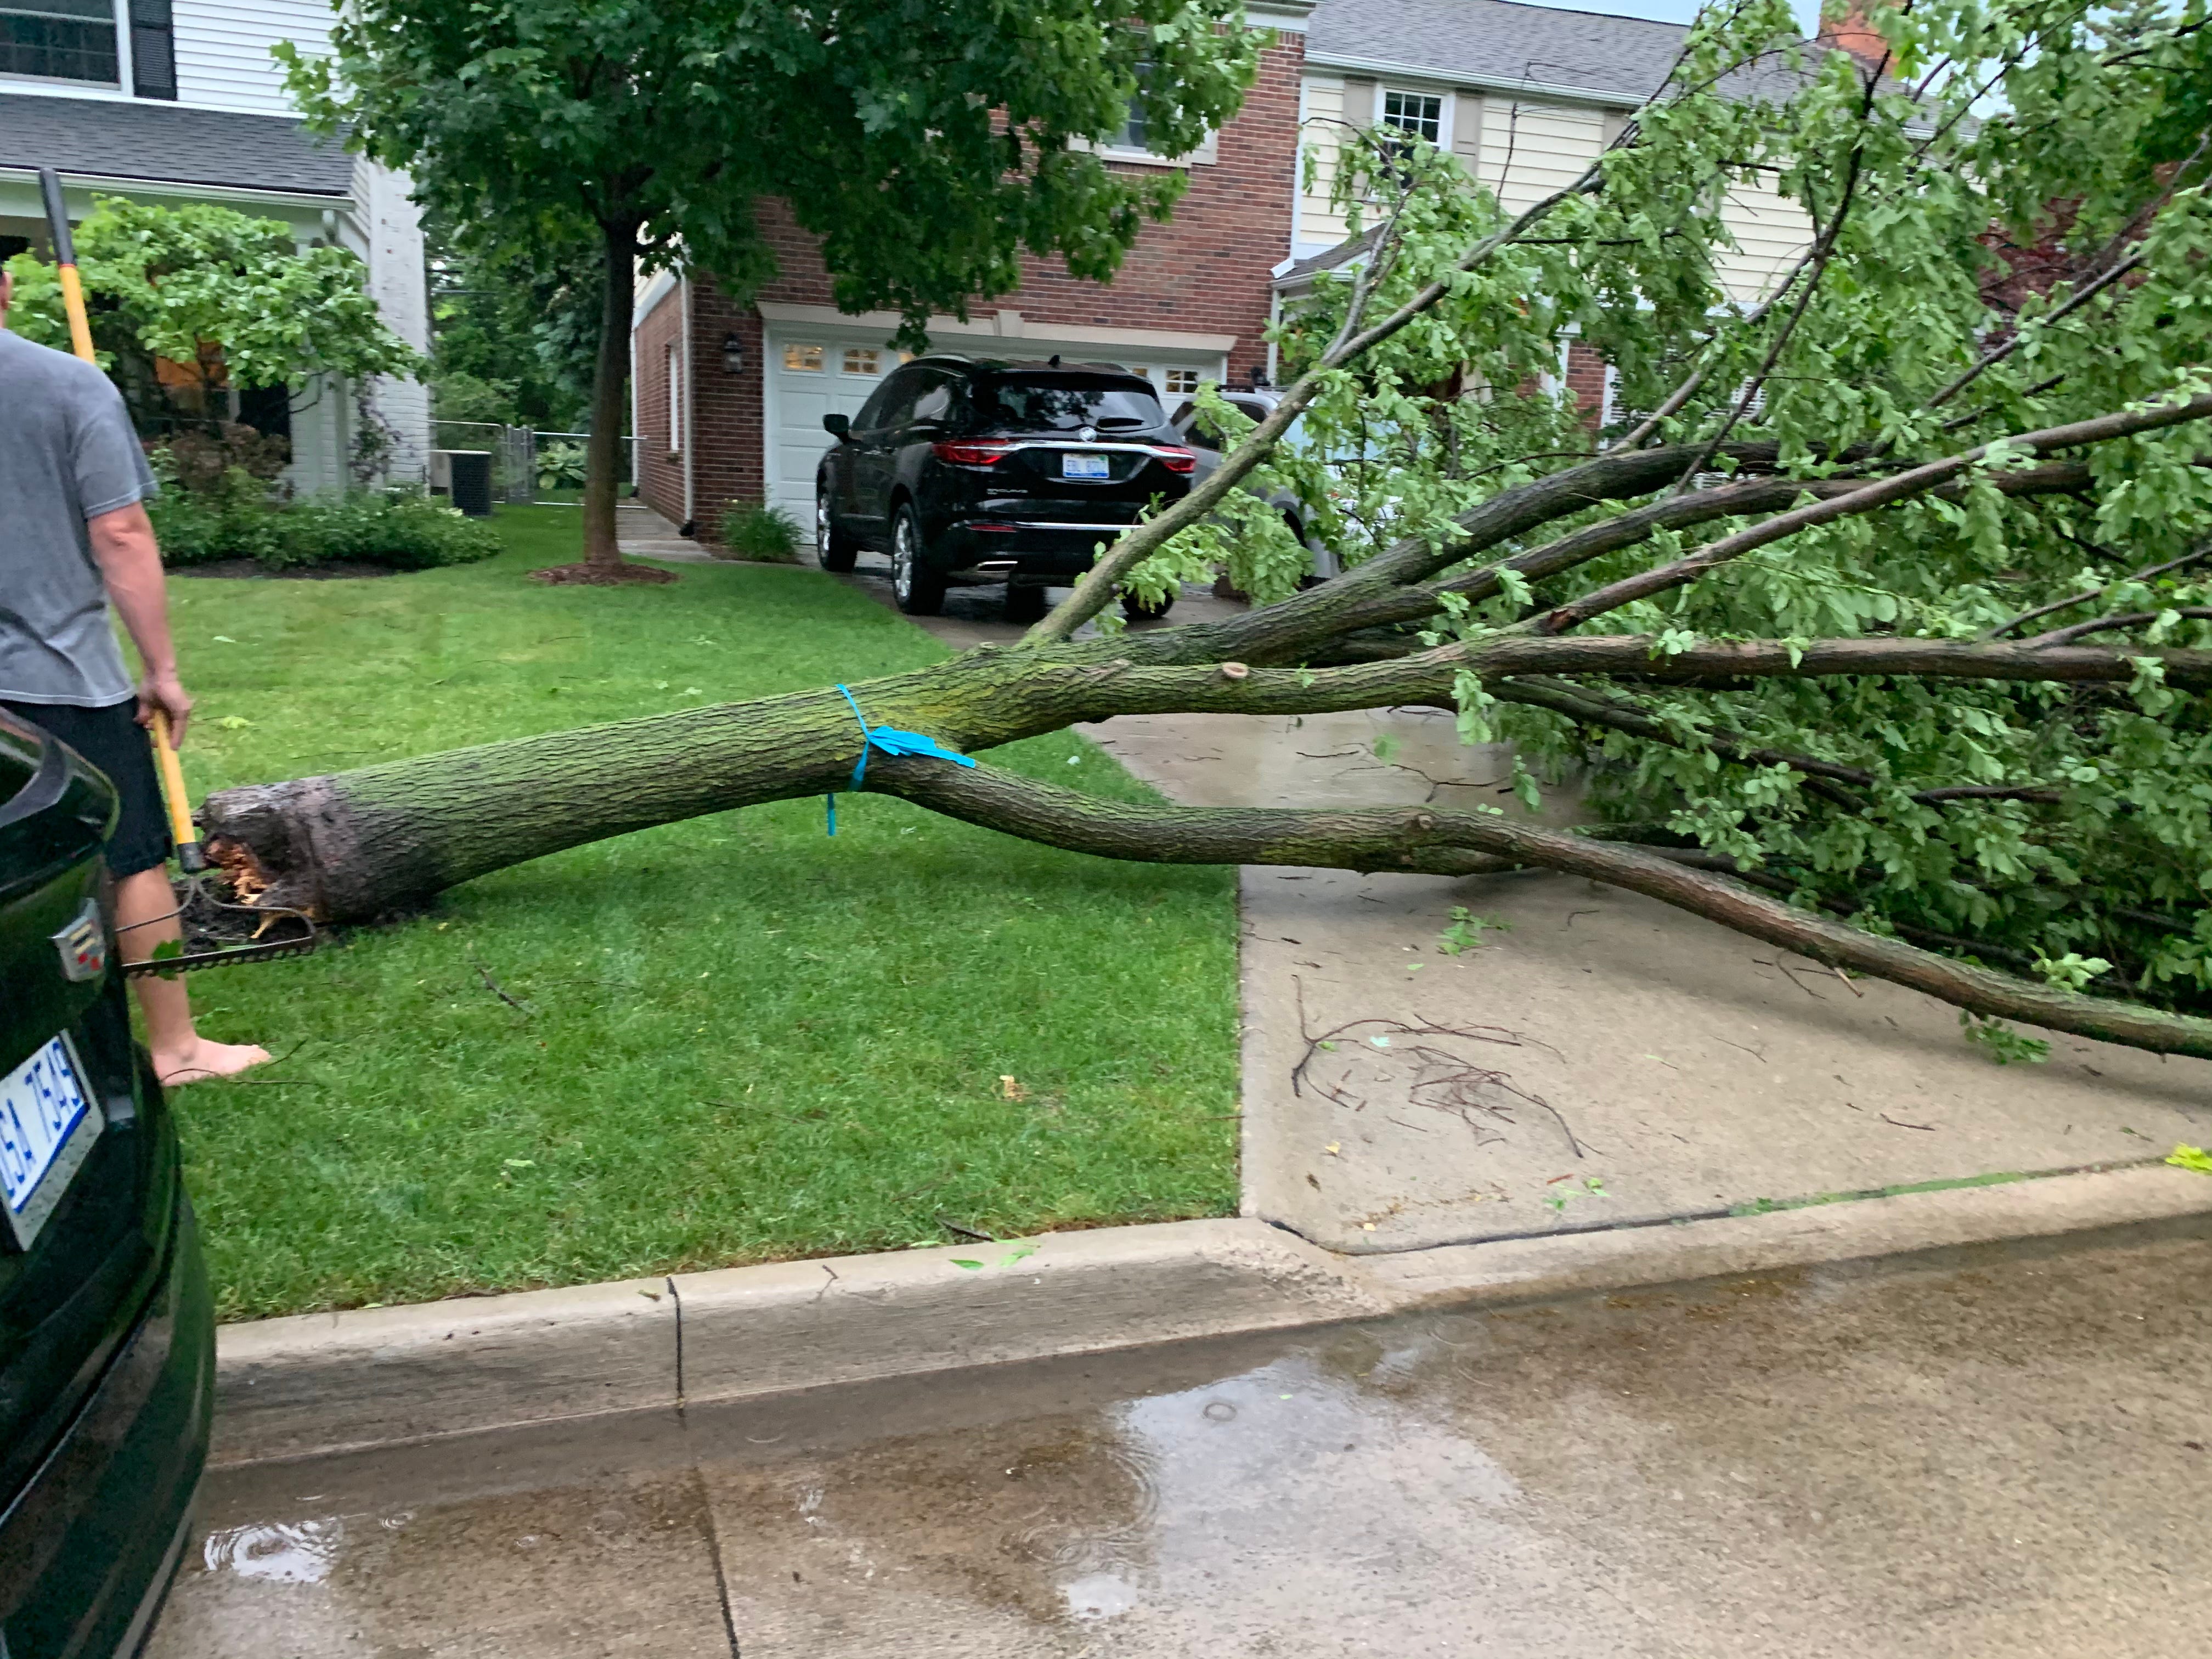 A tree is uprooted along N. Oxford Street in Grosse Pointe Woods on Wednesday, June 10, 2020.